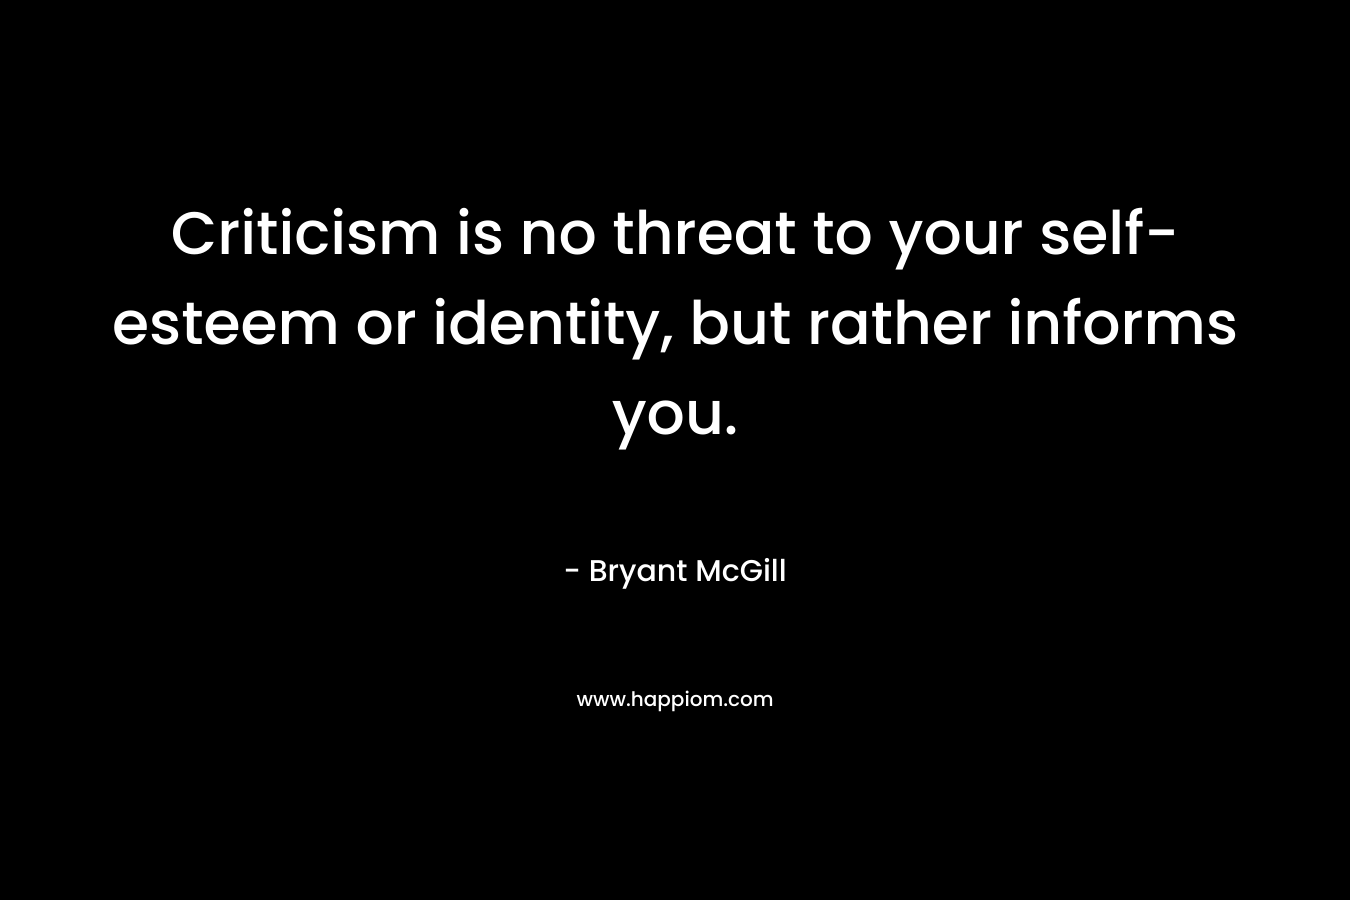 Criticism is no threat to your self-esteem or identity, but rather informs you. – Bryant McGill